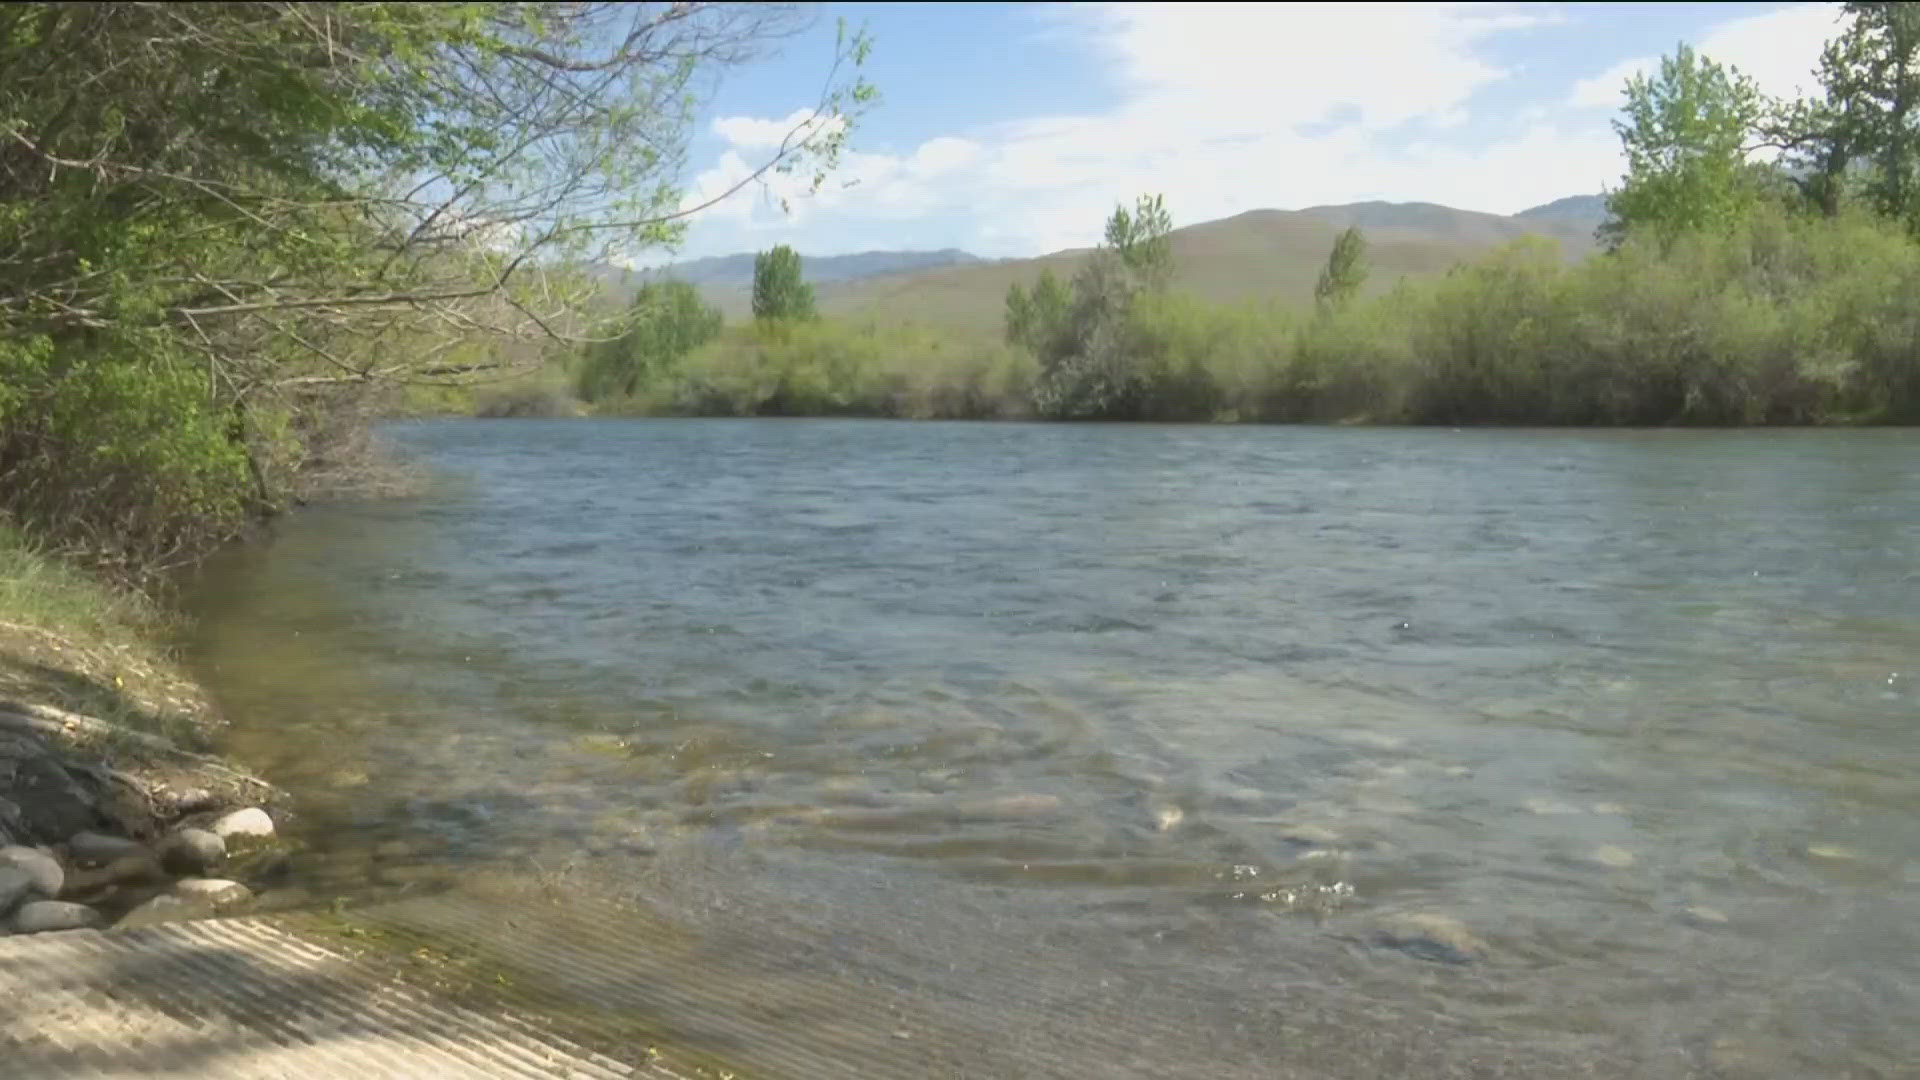 Floating the river is a favorite pastime for people in Boise, but river conditions remain dangerous. Officials advise waiting for safe conditions before going.